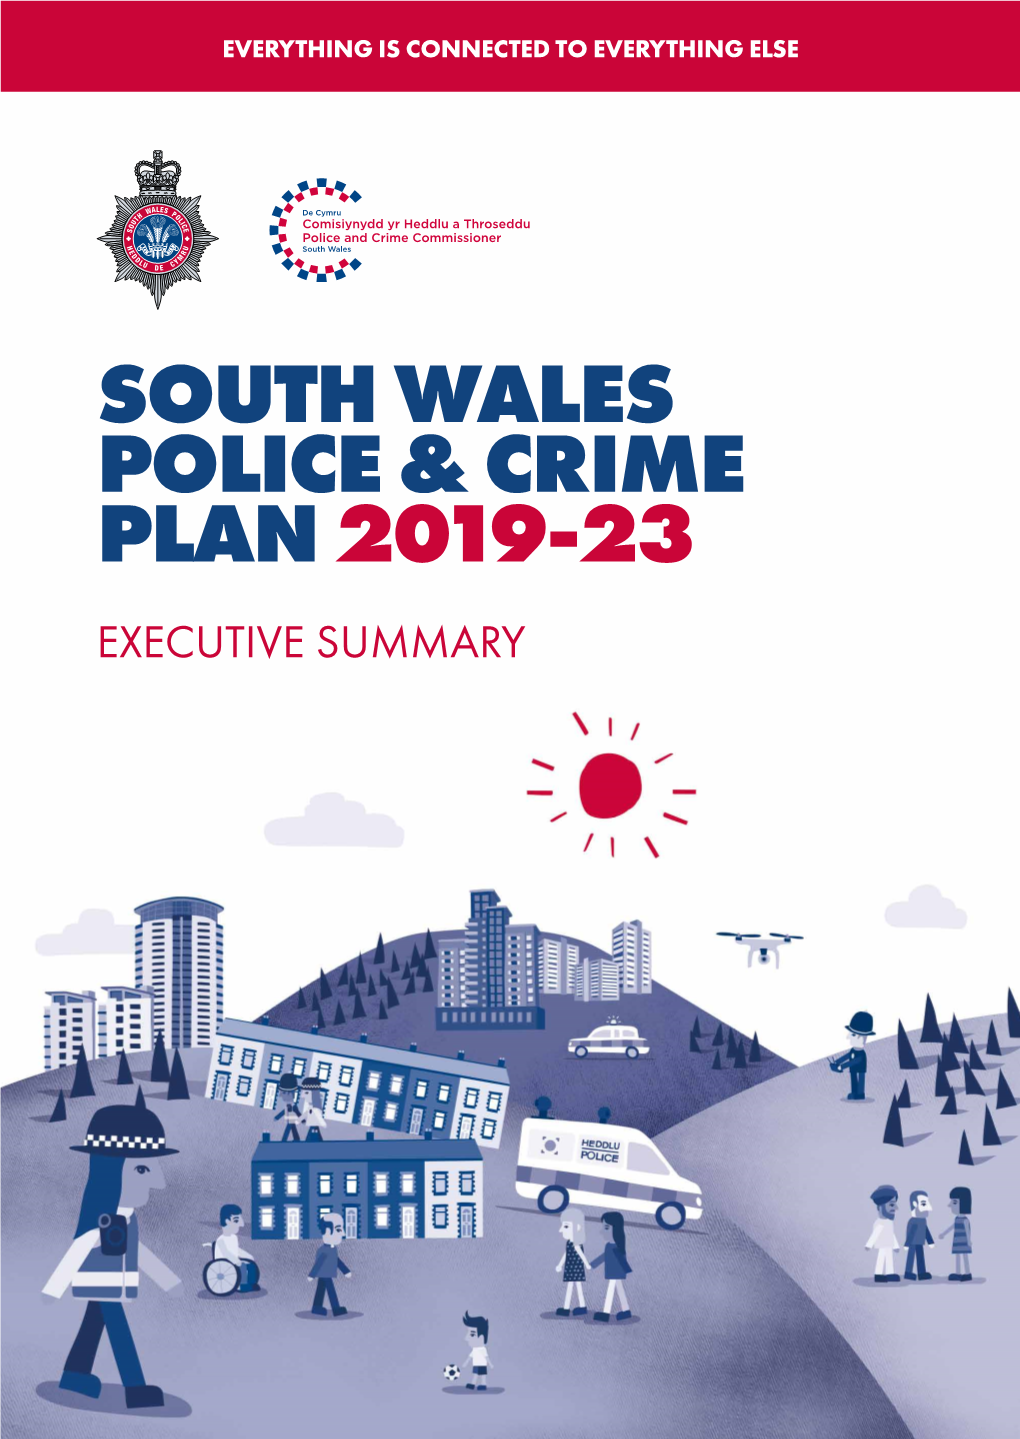 South Wales Police & Crime Plan 2019-23